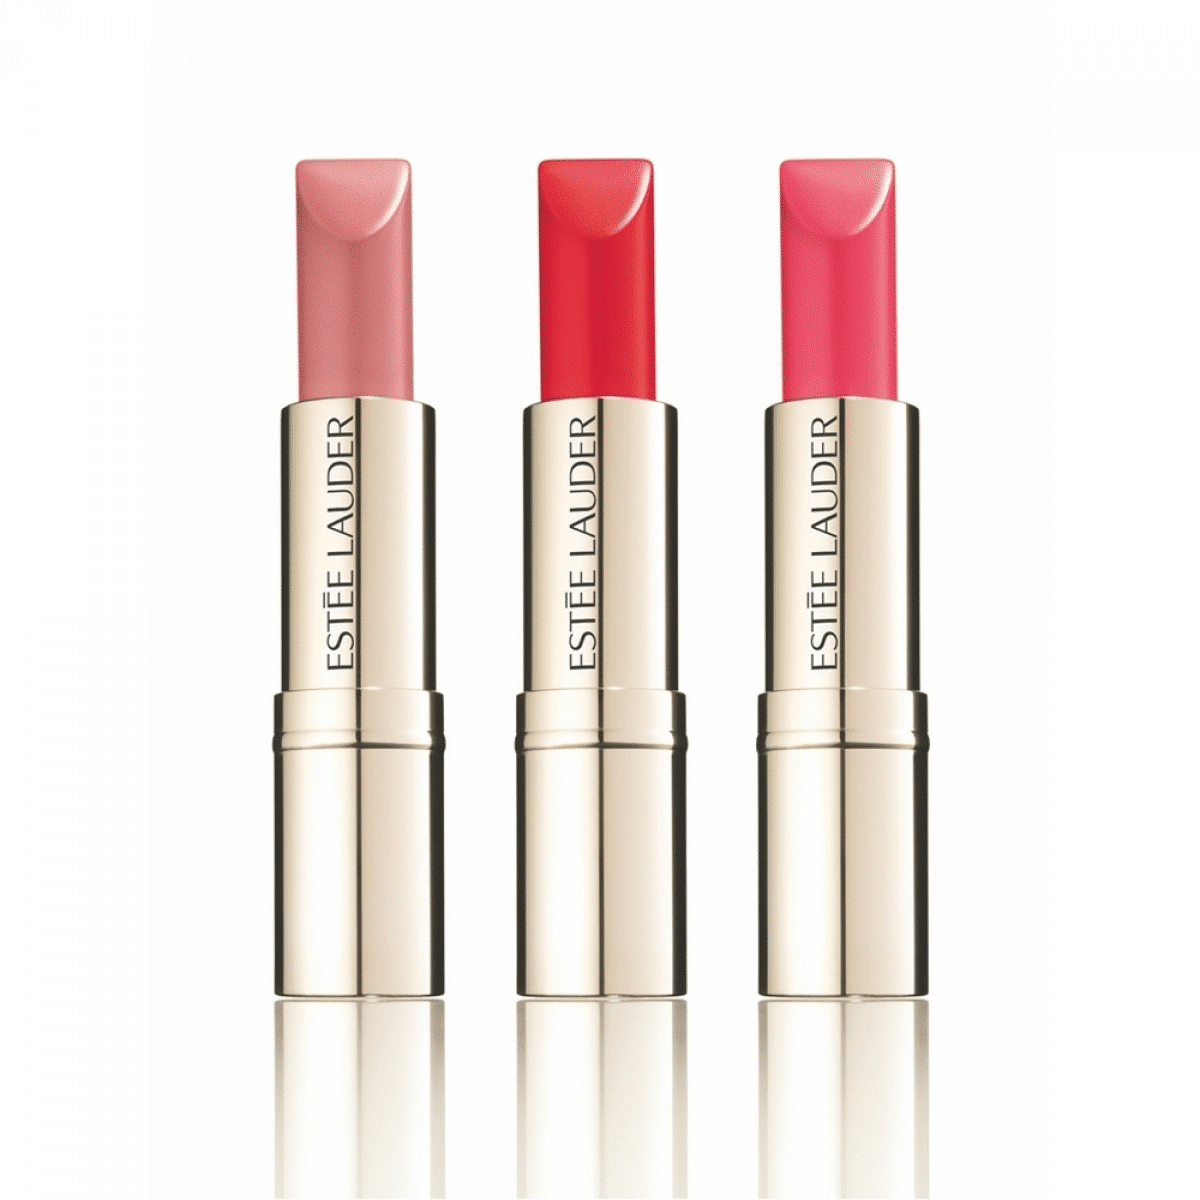 Estee Lauder Pure Color Love Lipstick is The Best Lipsticks in Malaysia: Reds, Nudes, Pinks